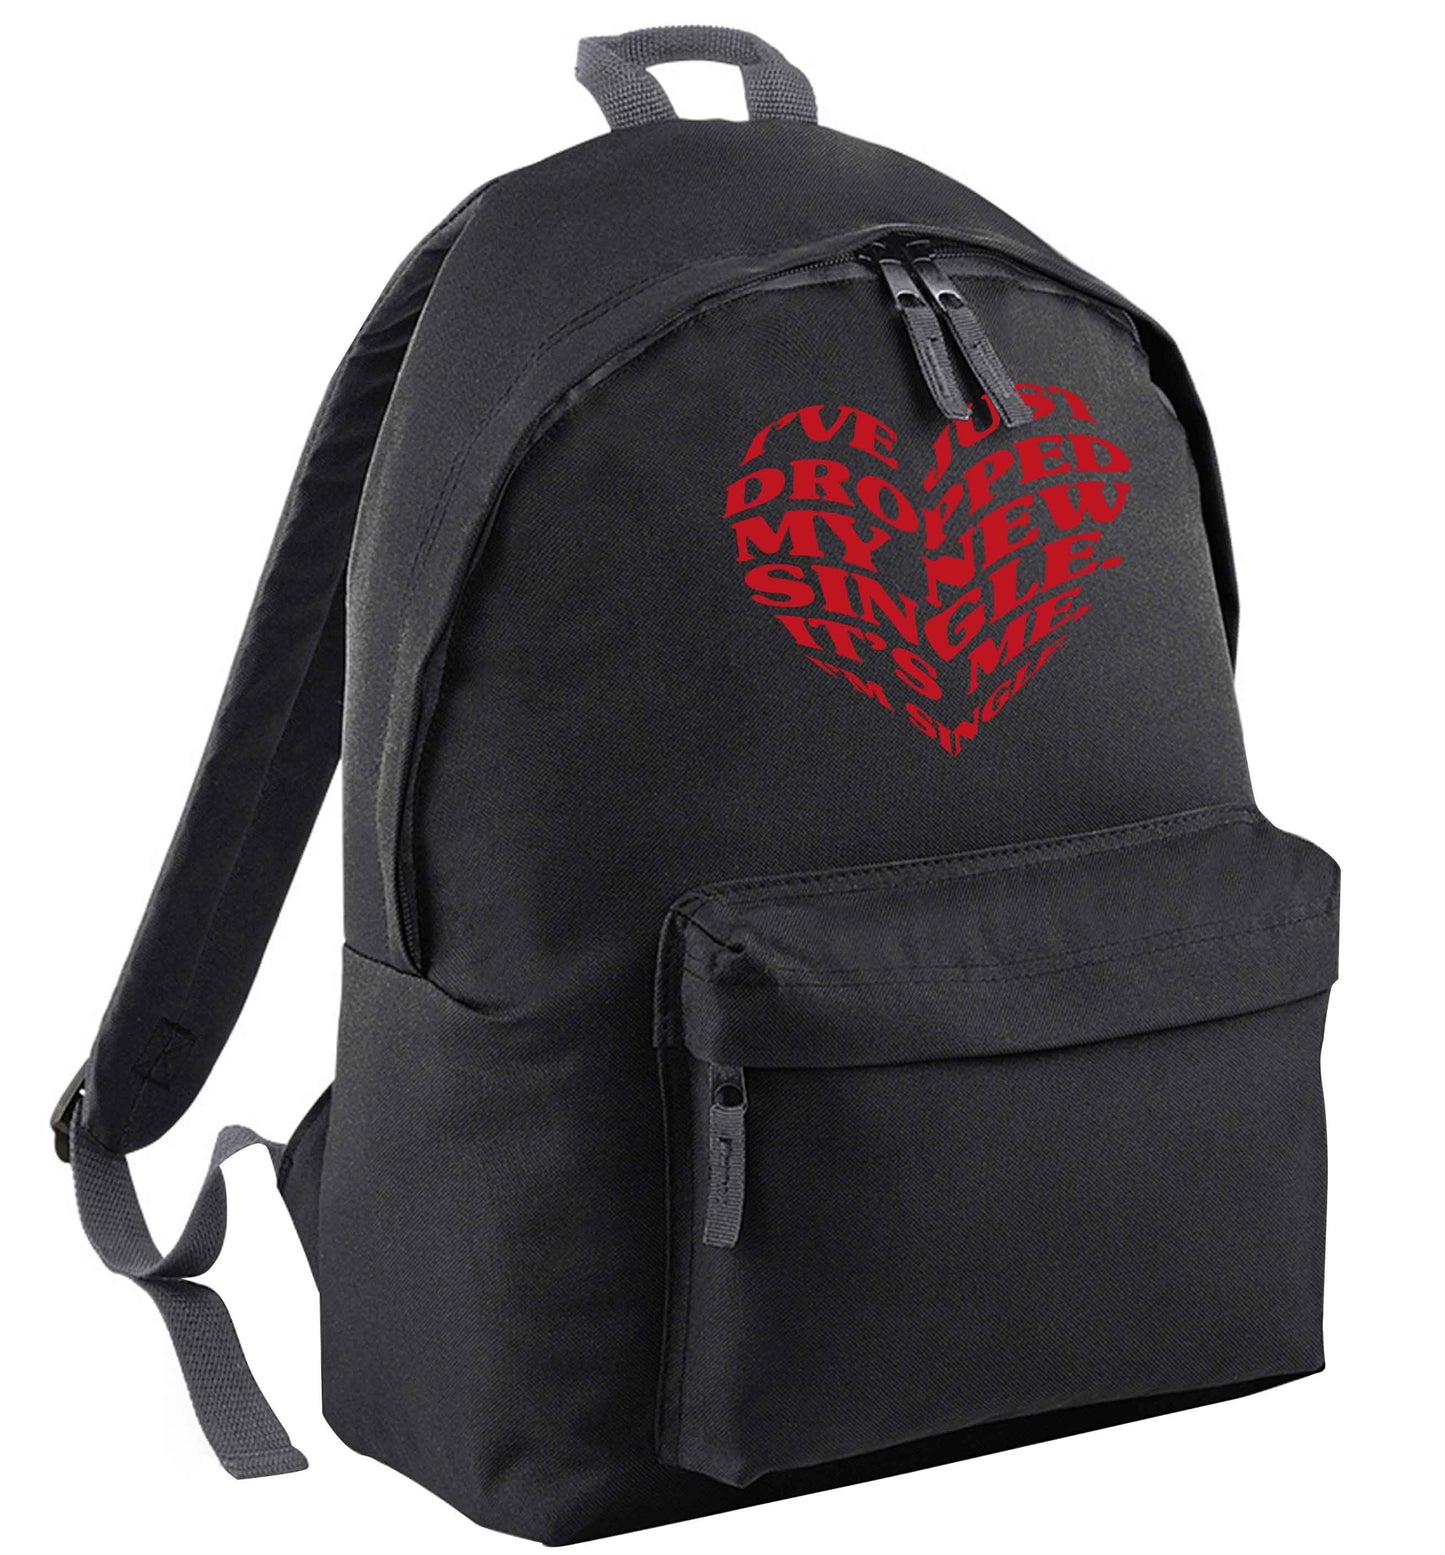 I've just dropped my new single it's me I'm single black adults backpack